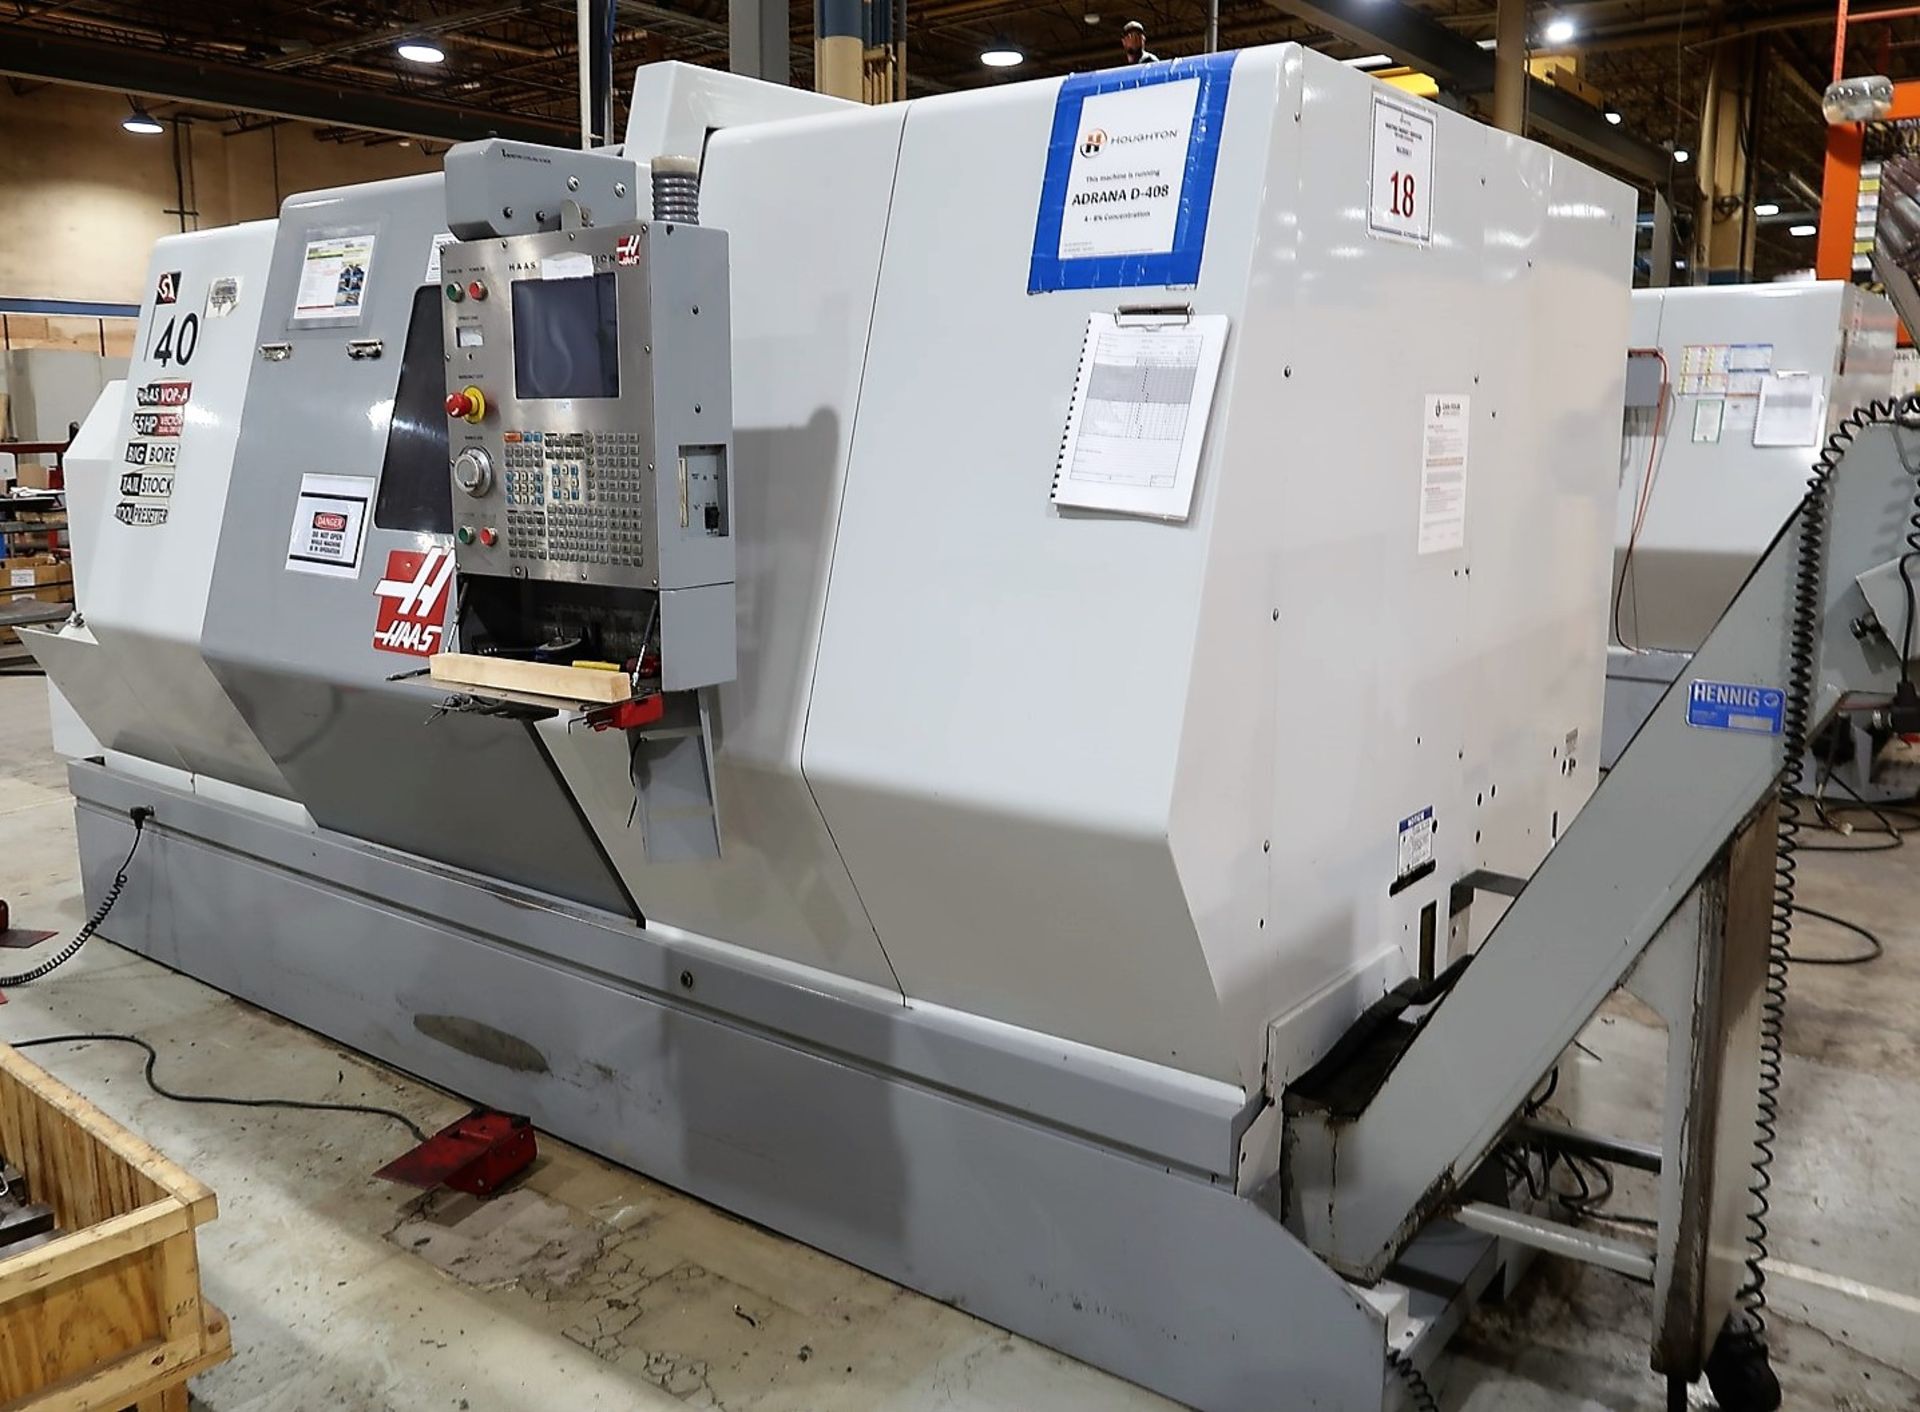 2005 HAAS SL-40TB CNC HORIZONTAL TURNING CENTER, 7.1 IN. BORE, HAAS CNC CONTROL, 10-STATION - Image 17 of 22